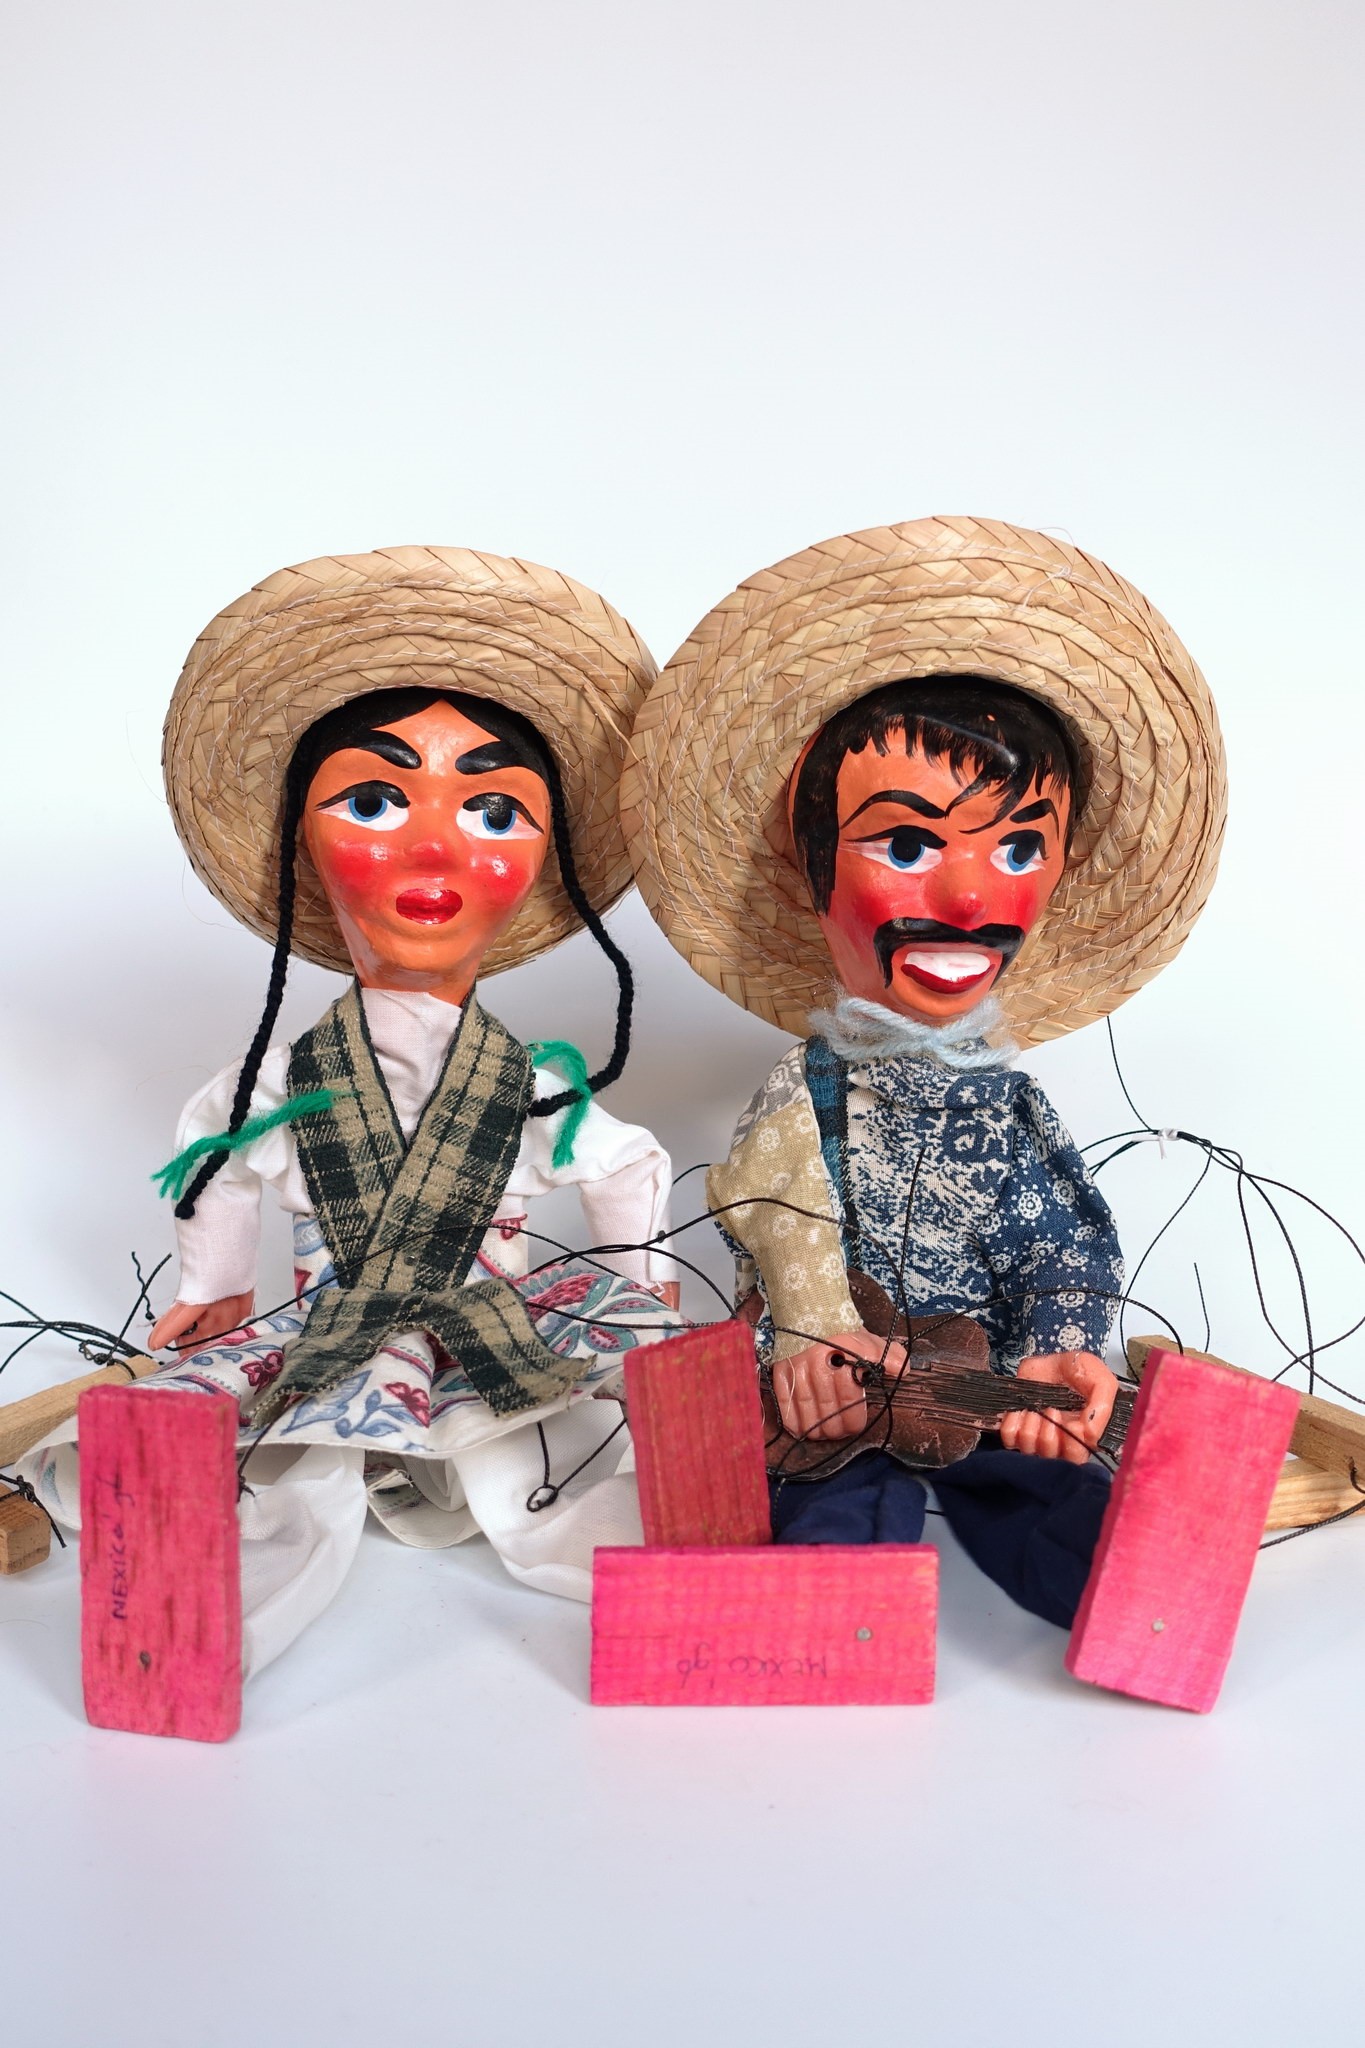 Mexico Dolls Puppets  National costume dolls from all over the world